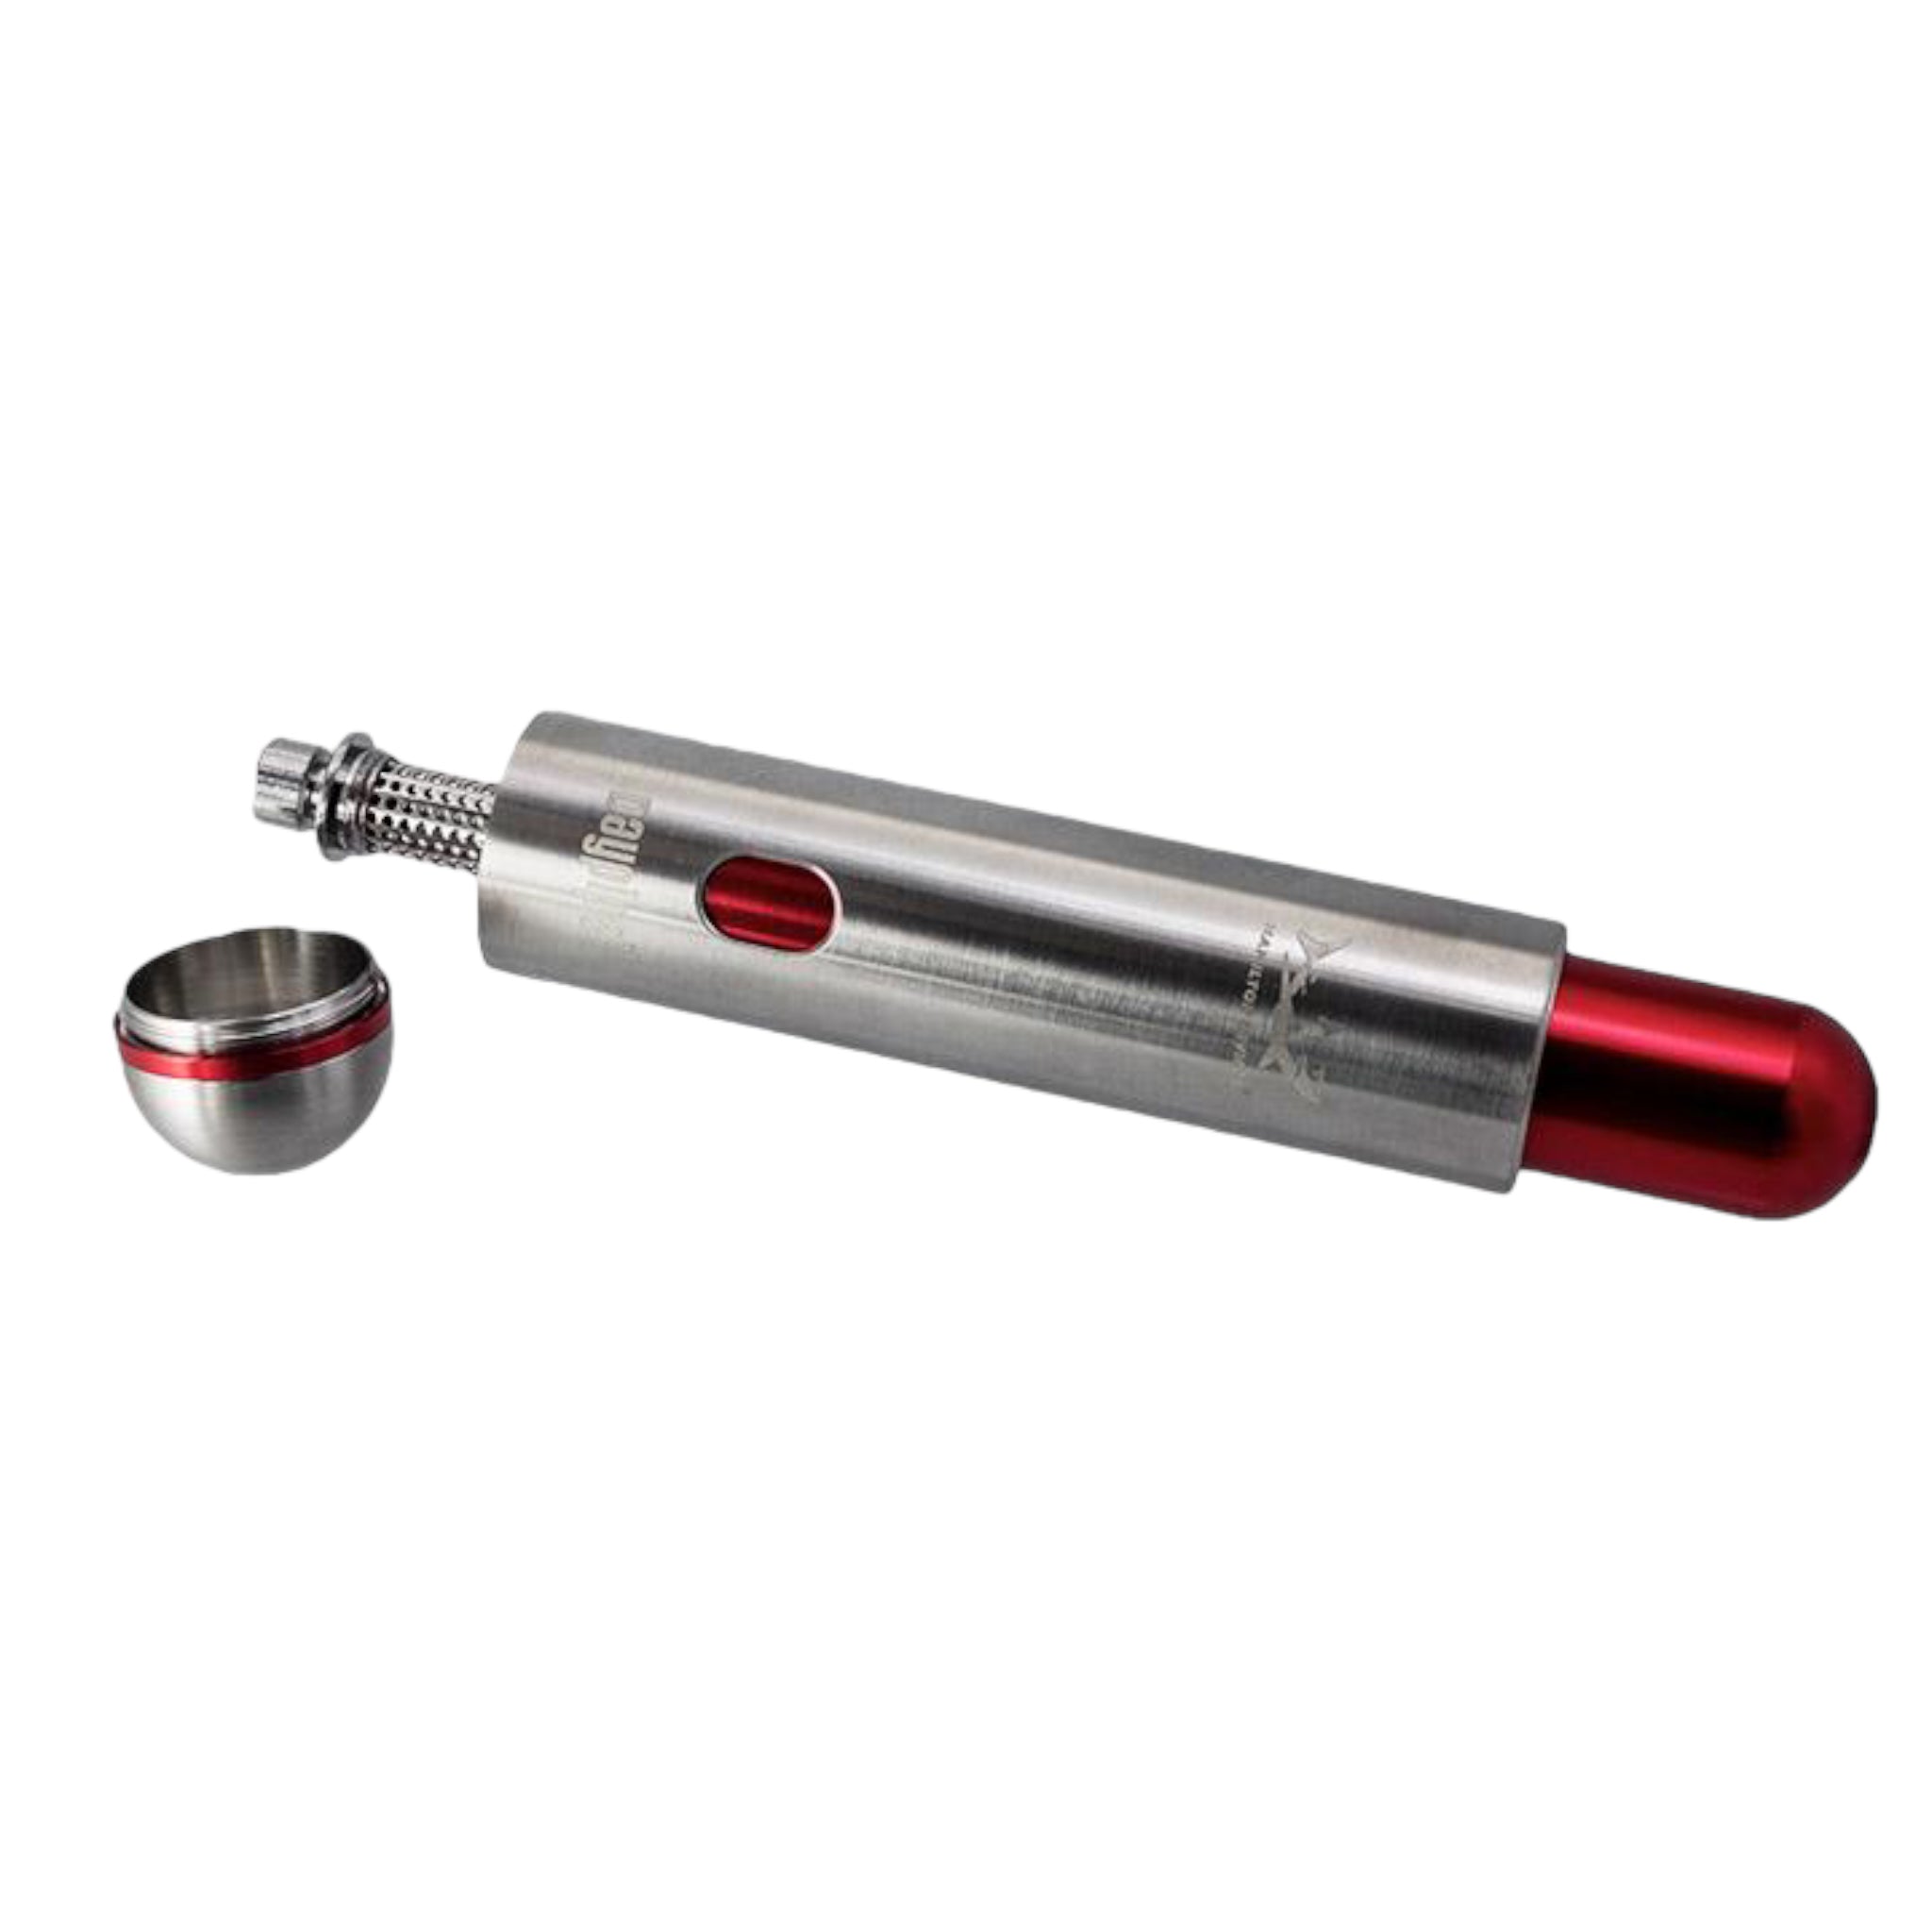 Hamilton Devices Daypipe Red